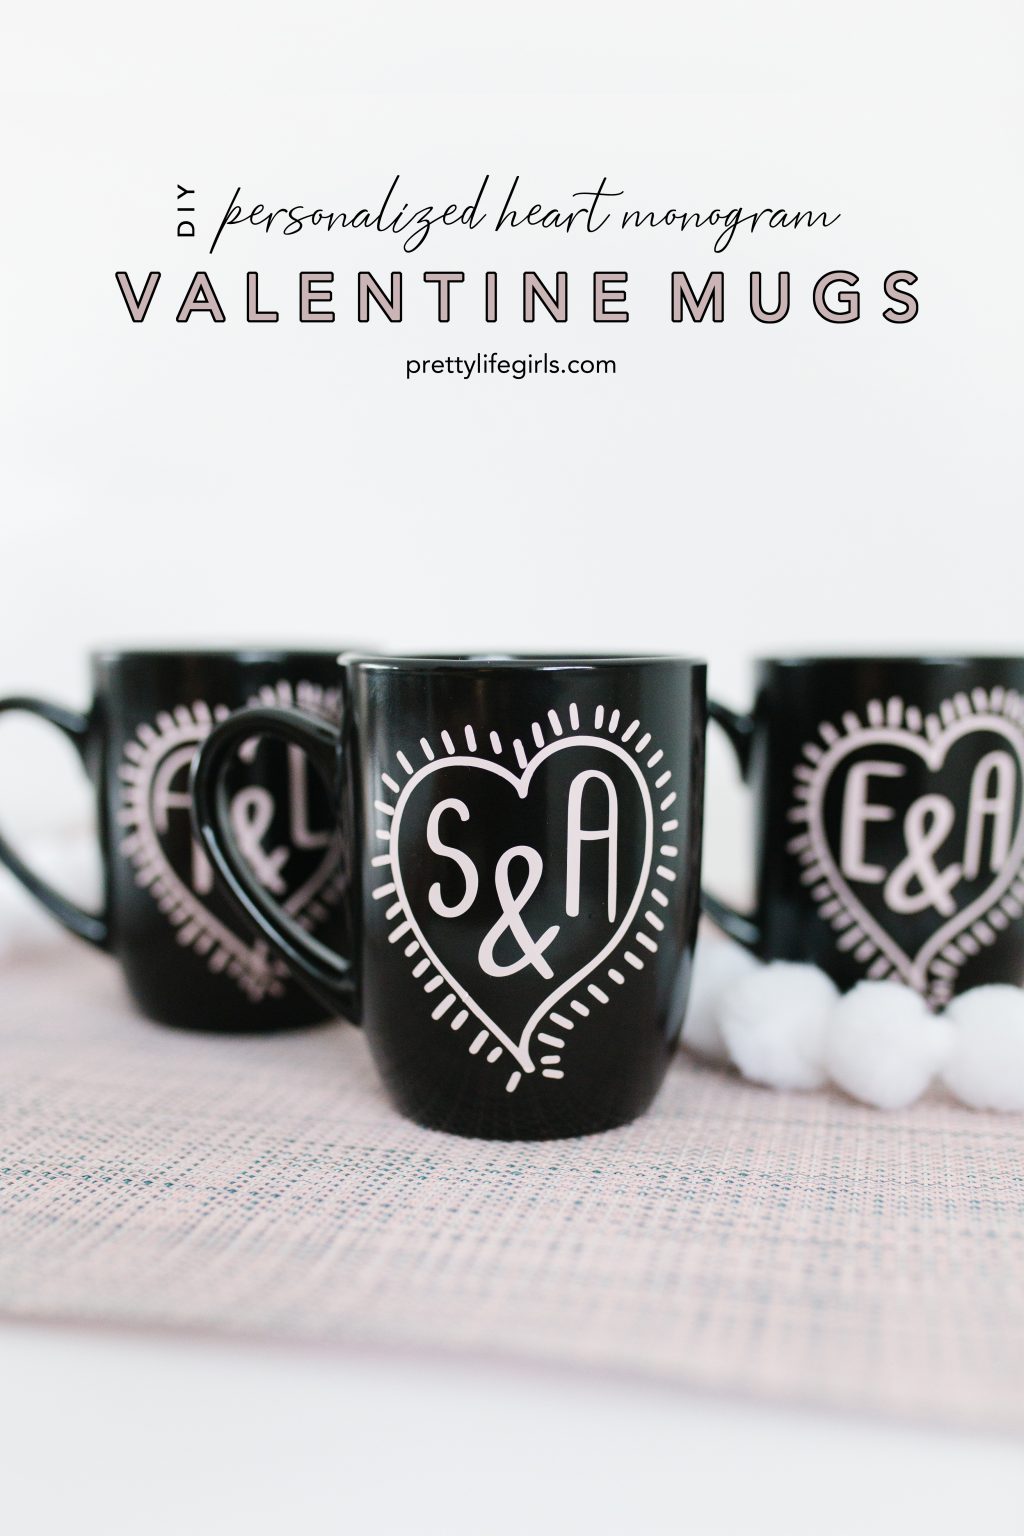 15 Lovely Handmade Valentine Gifts + featured by Top US Craft Blog + The Pretty Life Girls: + DIY Valentine Mugs with Vinyl